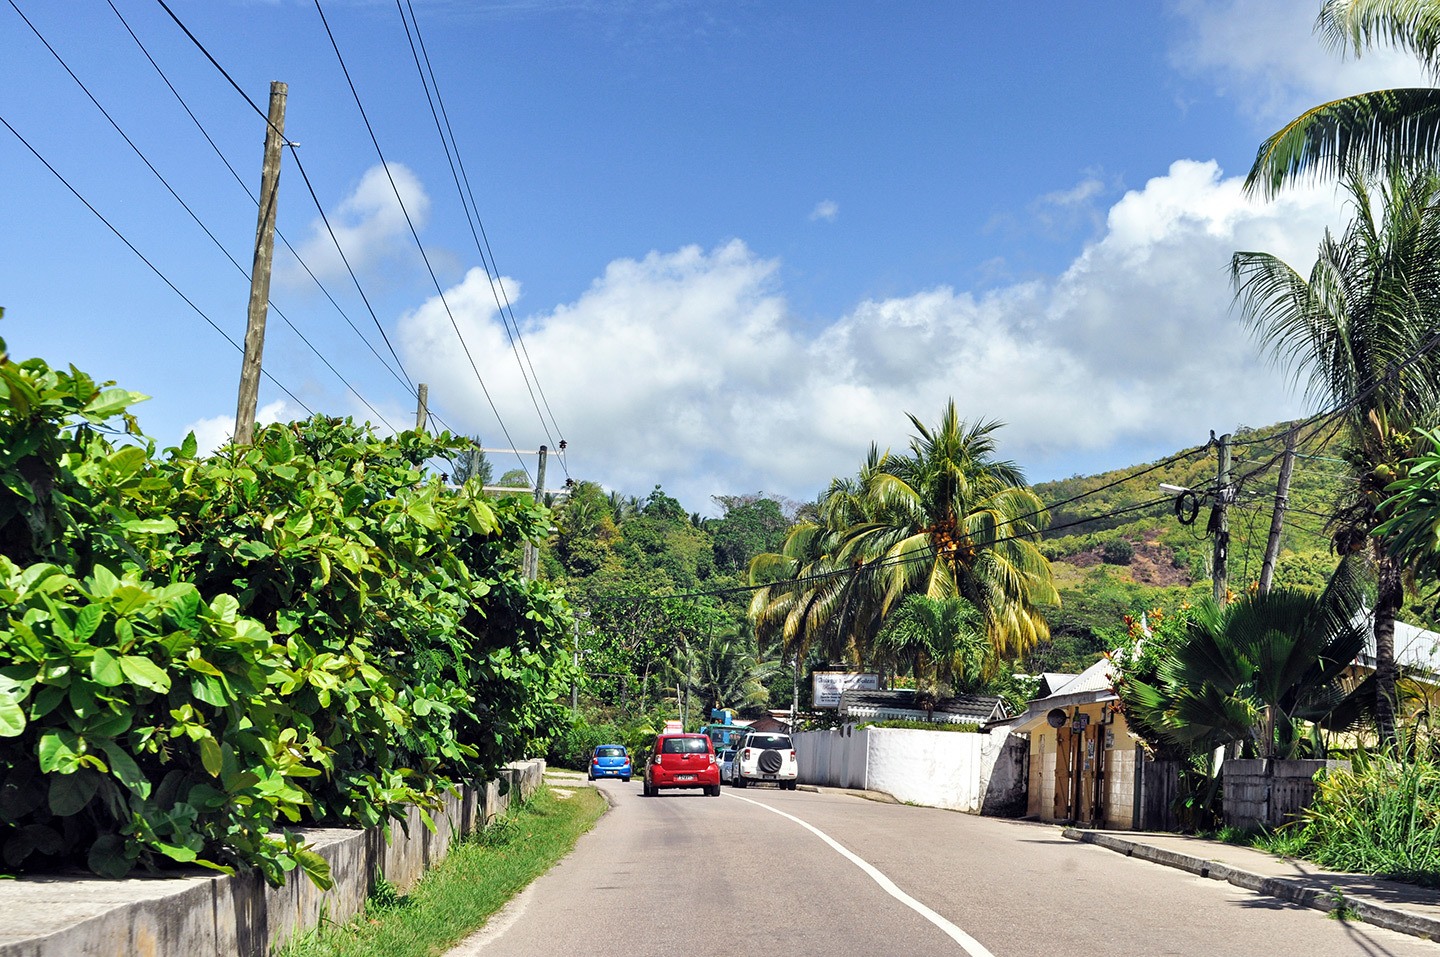 Roads in Mahé in the Seychelles